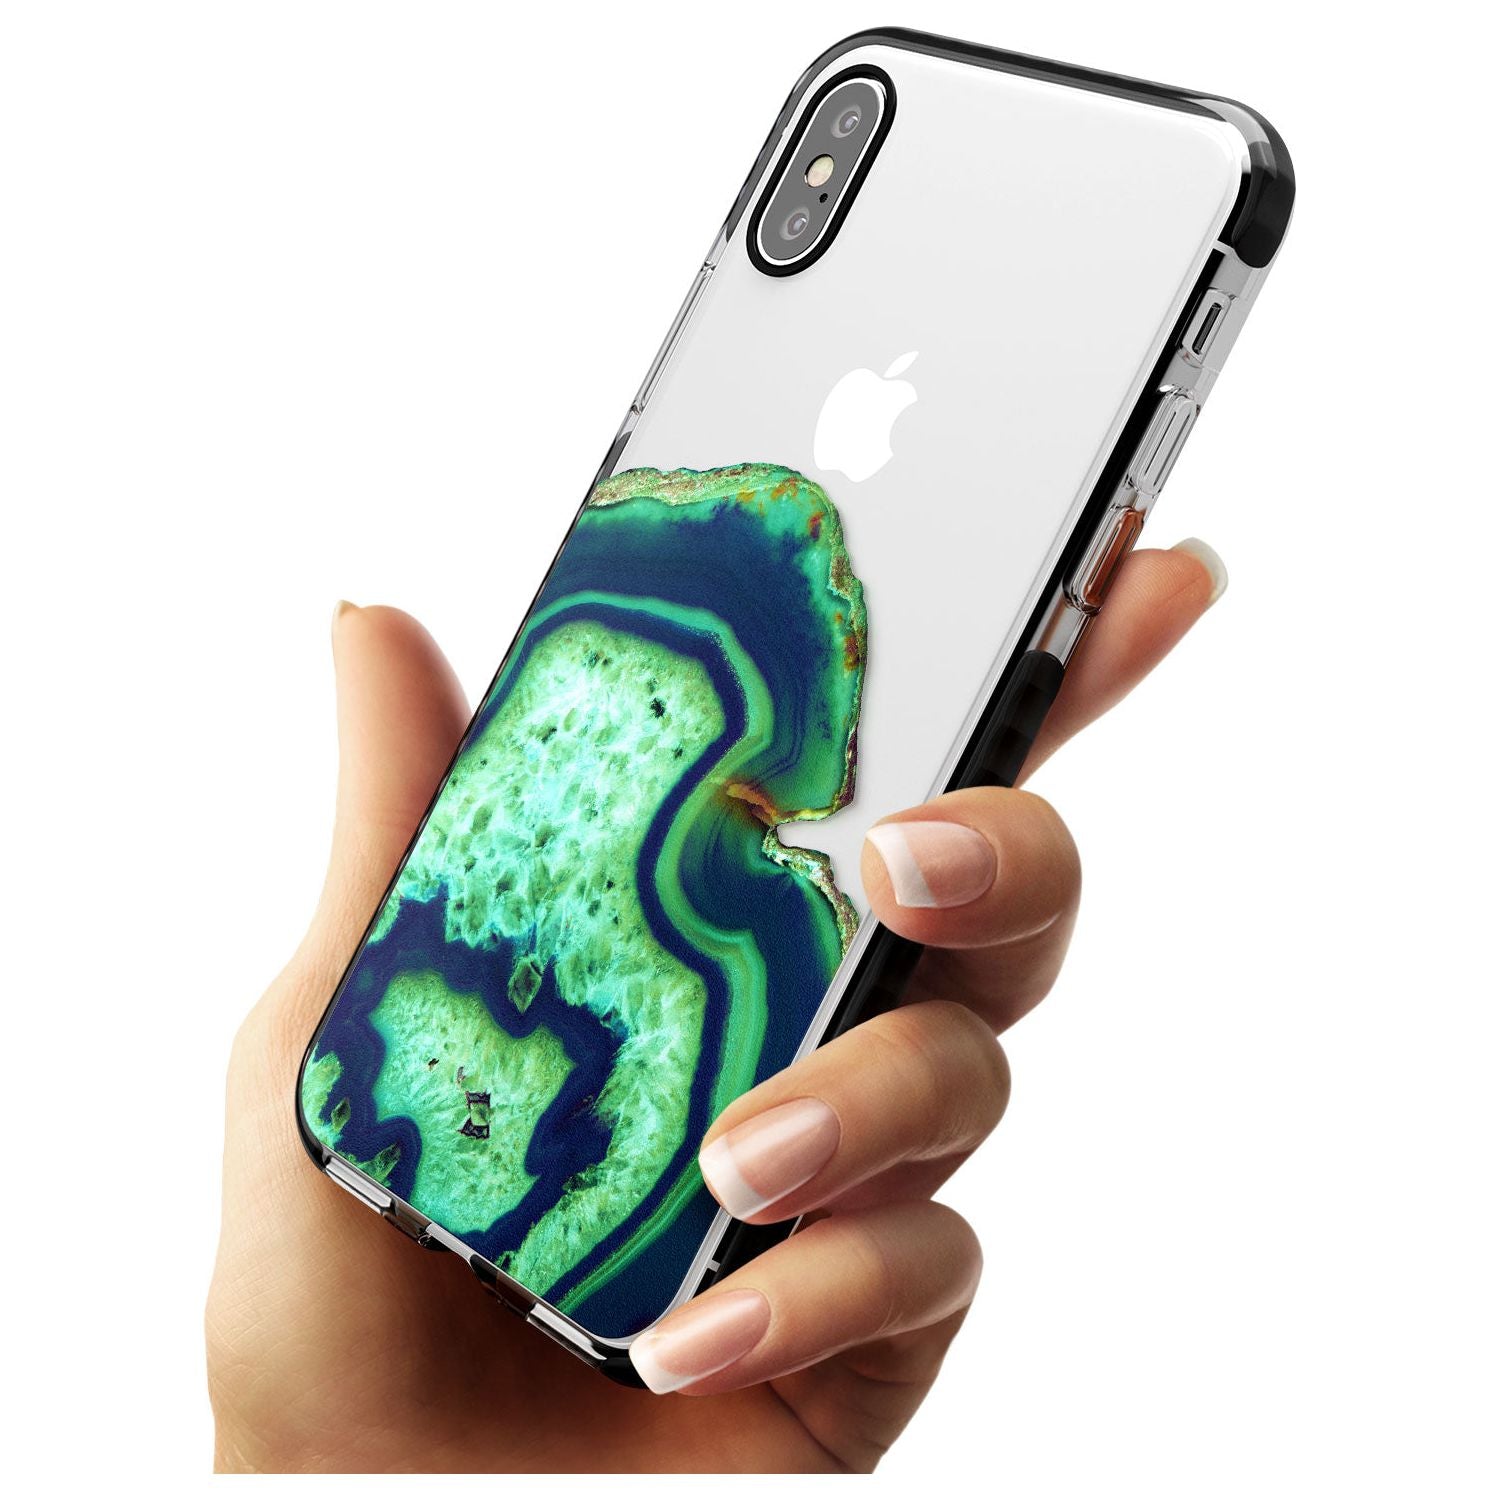 Neon Green & Blue Agate Crystal Transparent Design Black Impact Phone Case for iPhone X XS Max XR